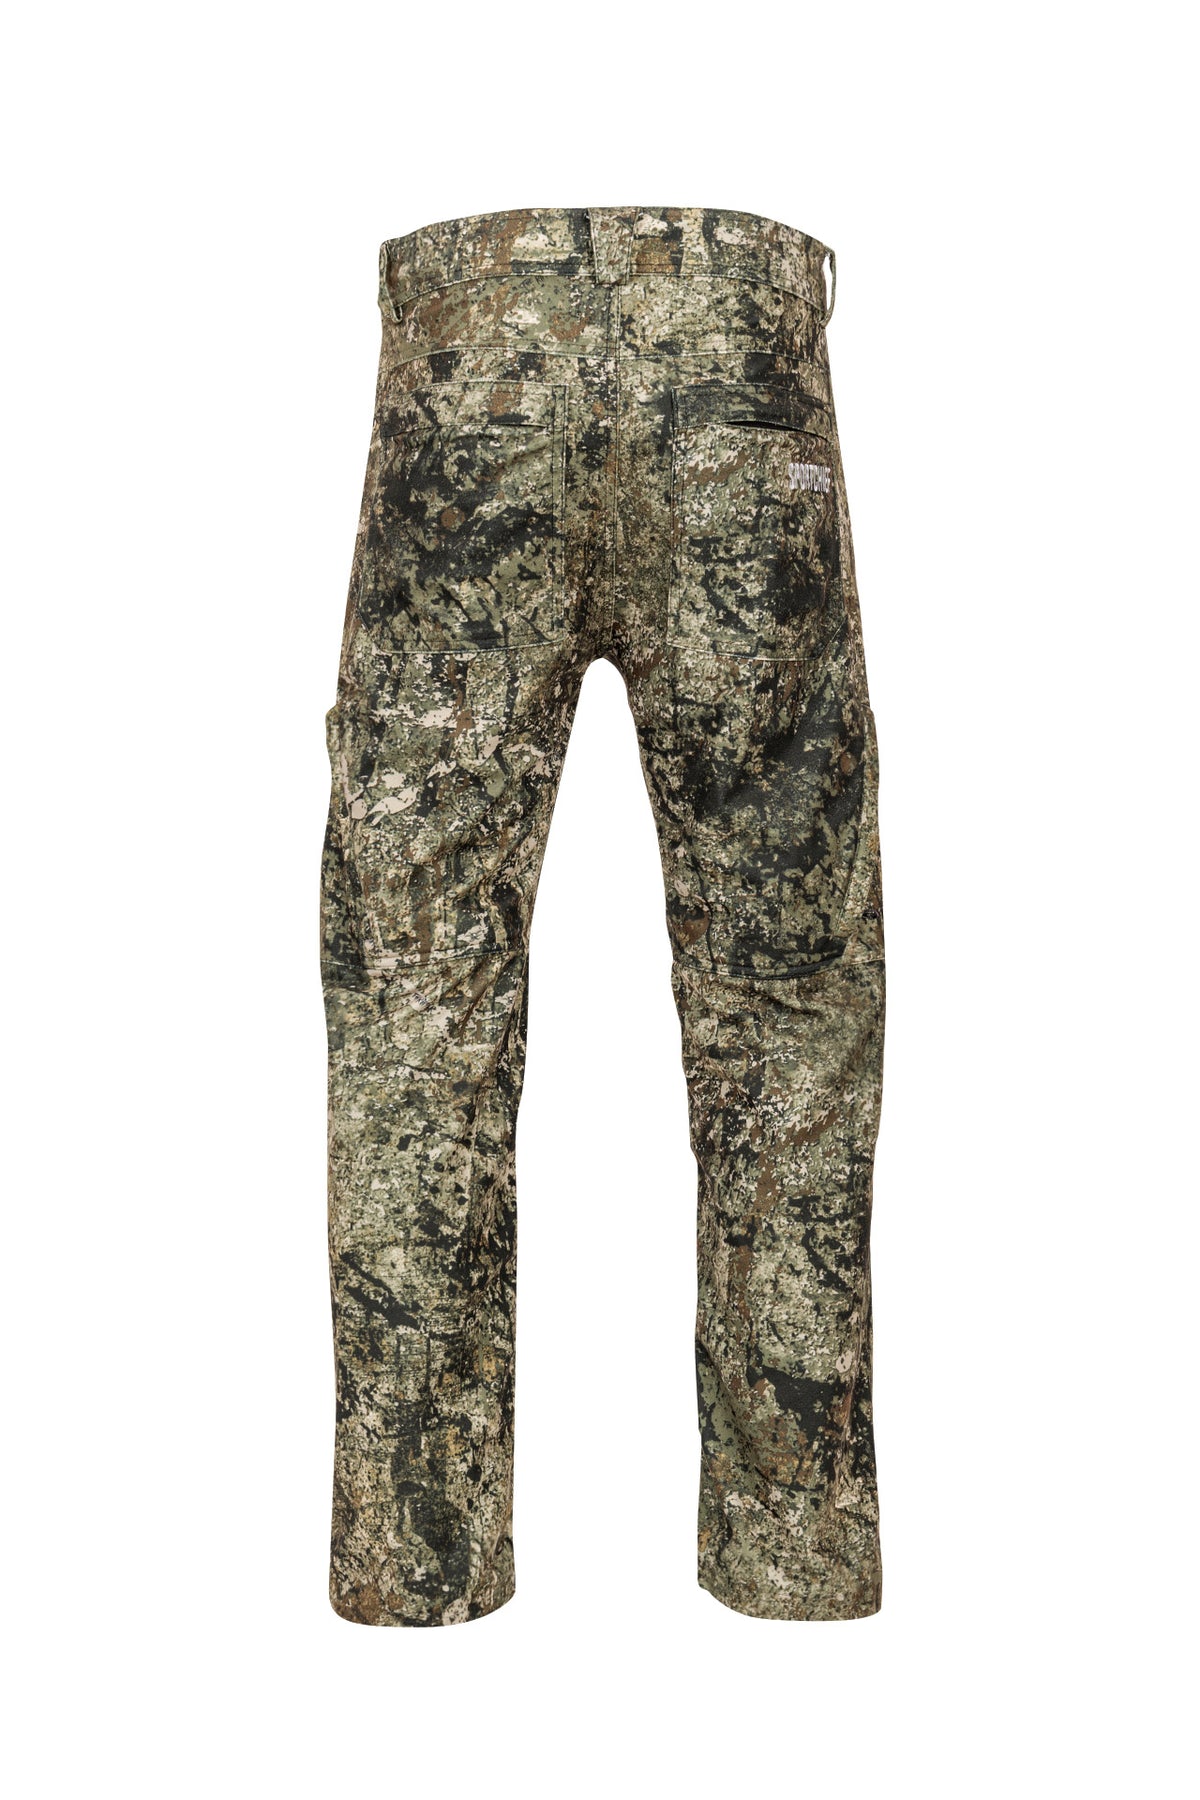 Hunting pants for men Heavy Duty, 38 / The Ripper